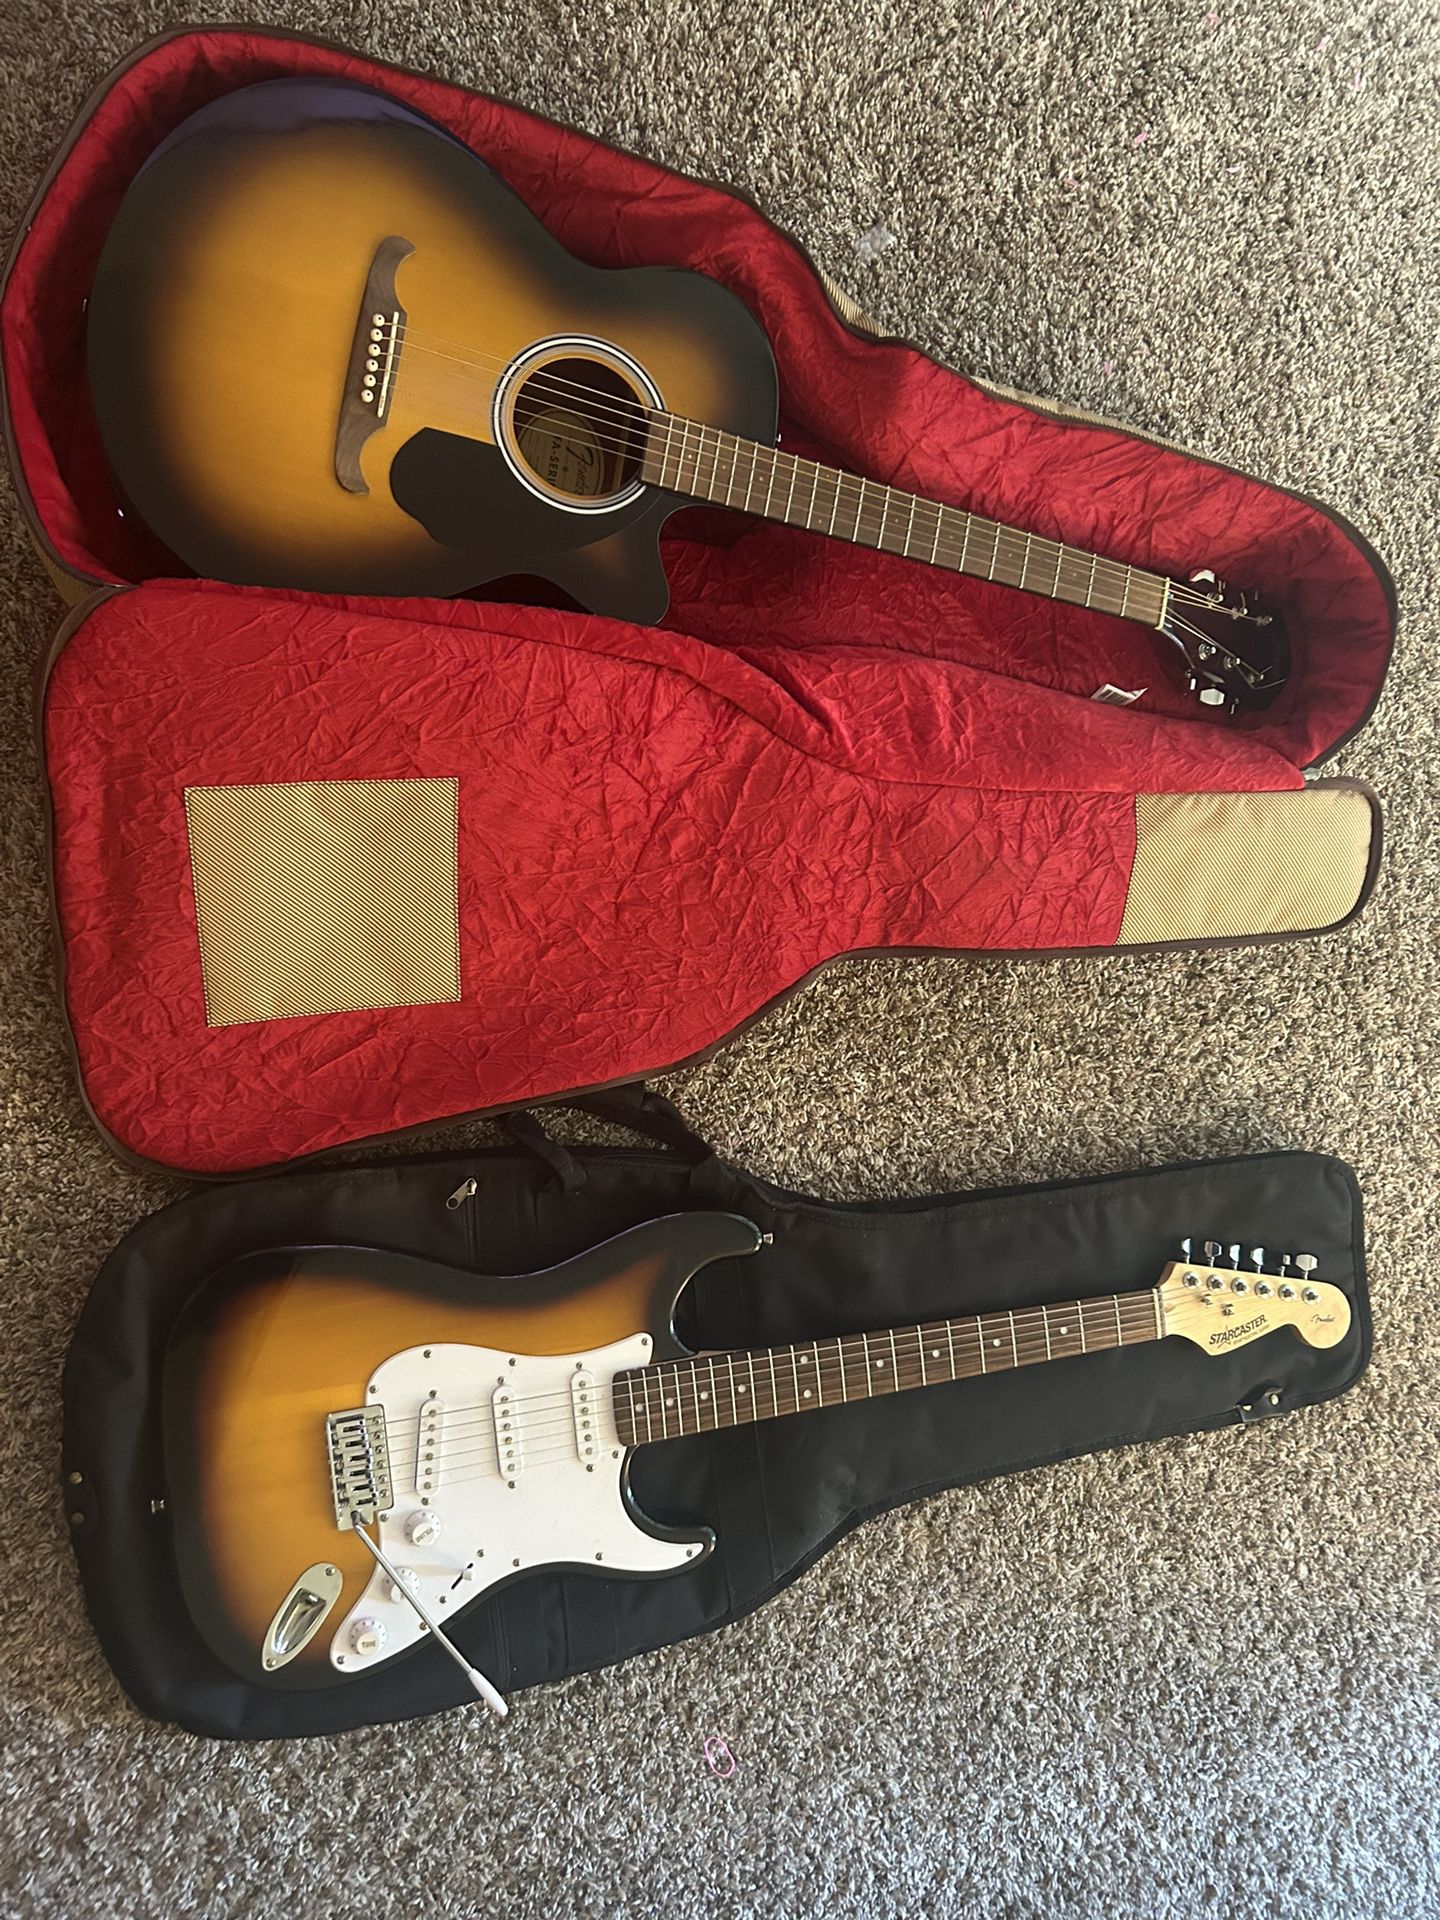 2 Fender Guitars And R25 Amp W/cords